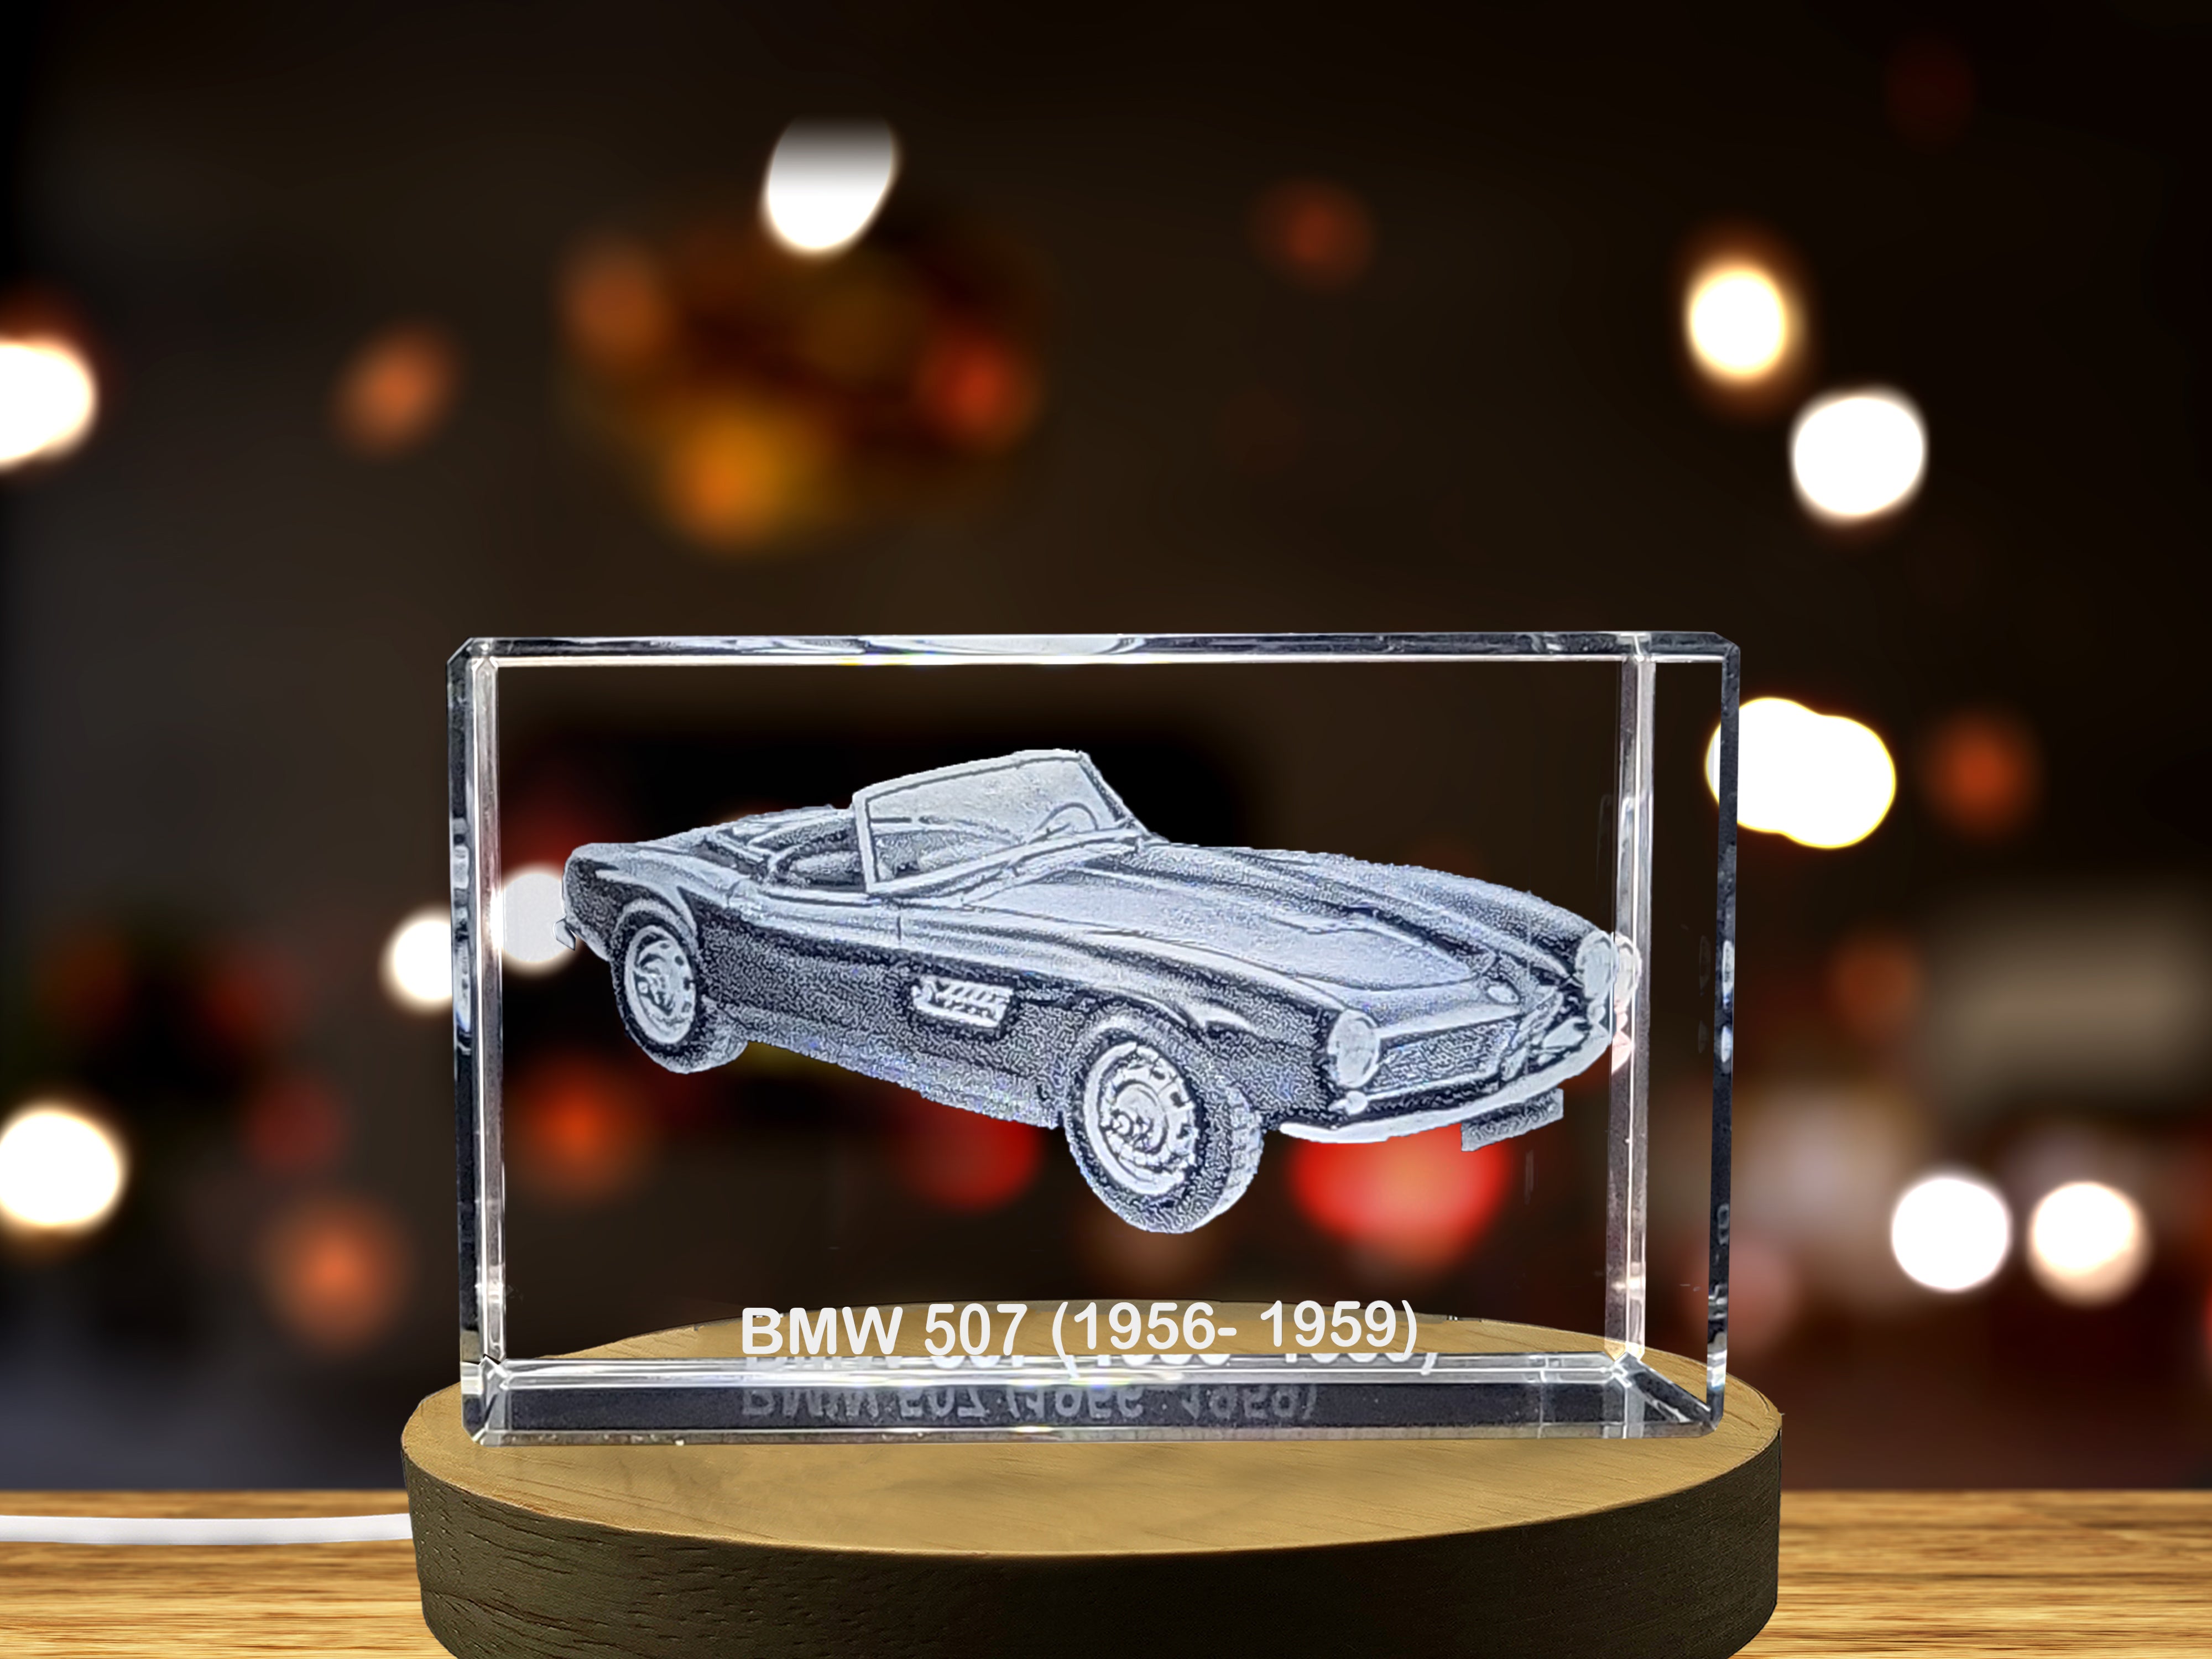 BMW 507 Iconic Roadster Collectible Crystal Sculpture | Elegant 1956-1959 Grand Tourer A&B Crystal Collection